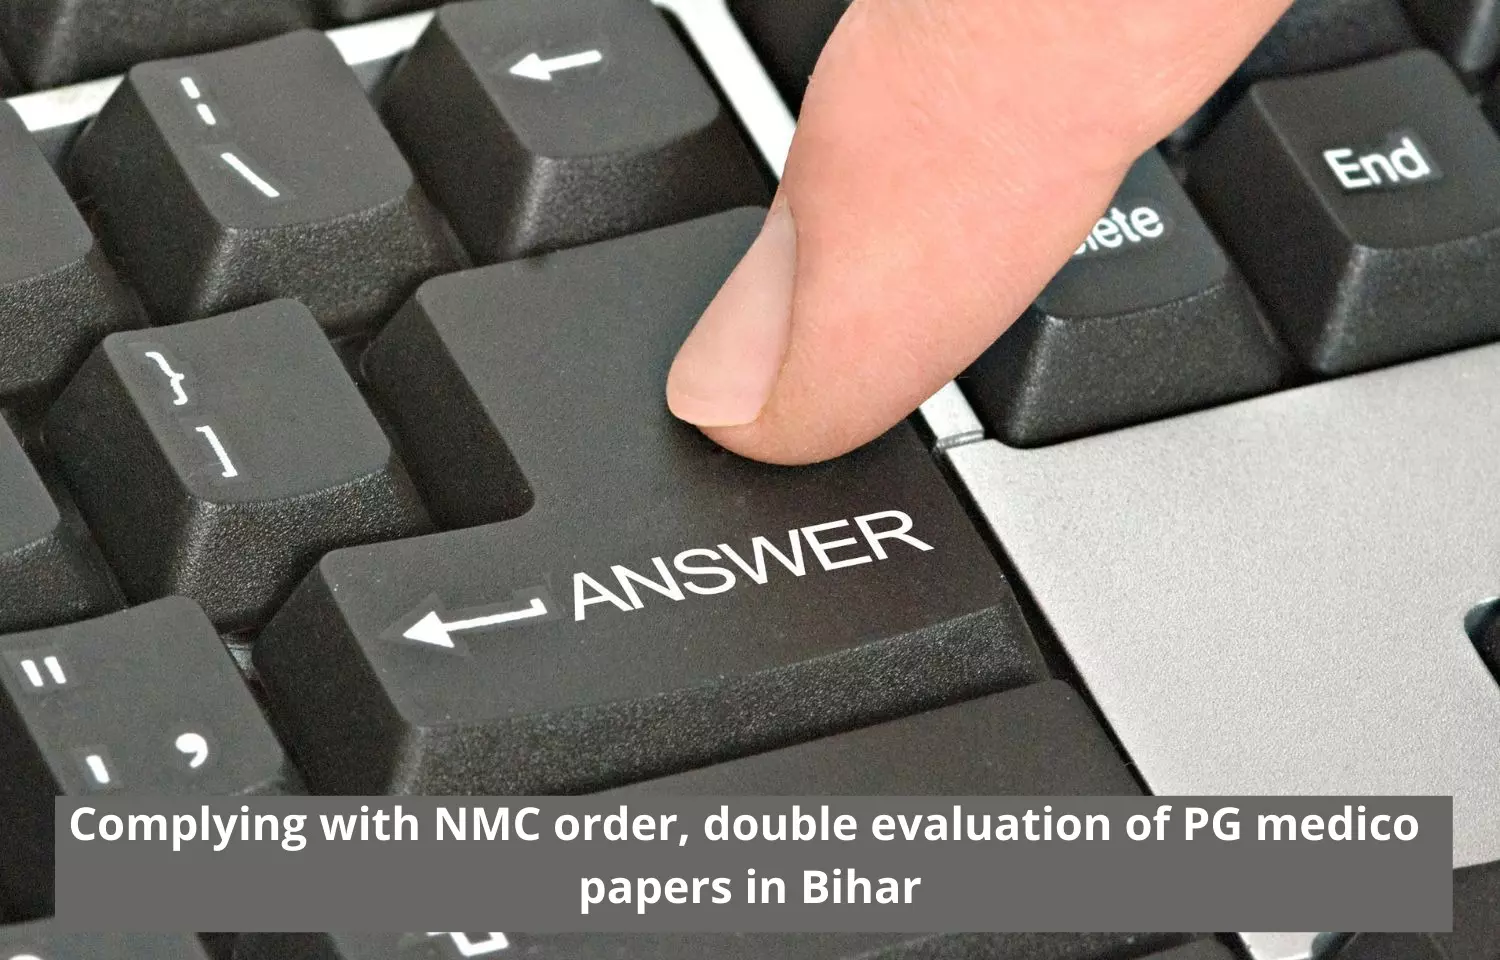 Complying with NMC order, double evaluation of PG medico papers in Bihar